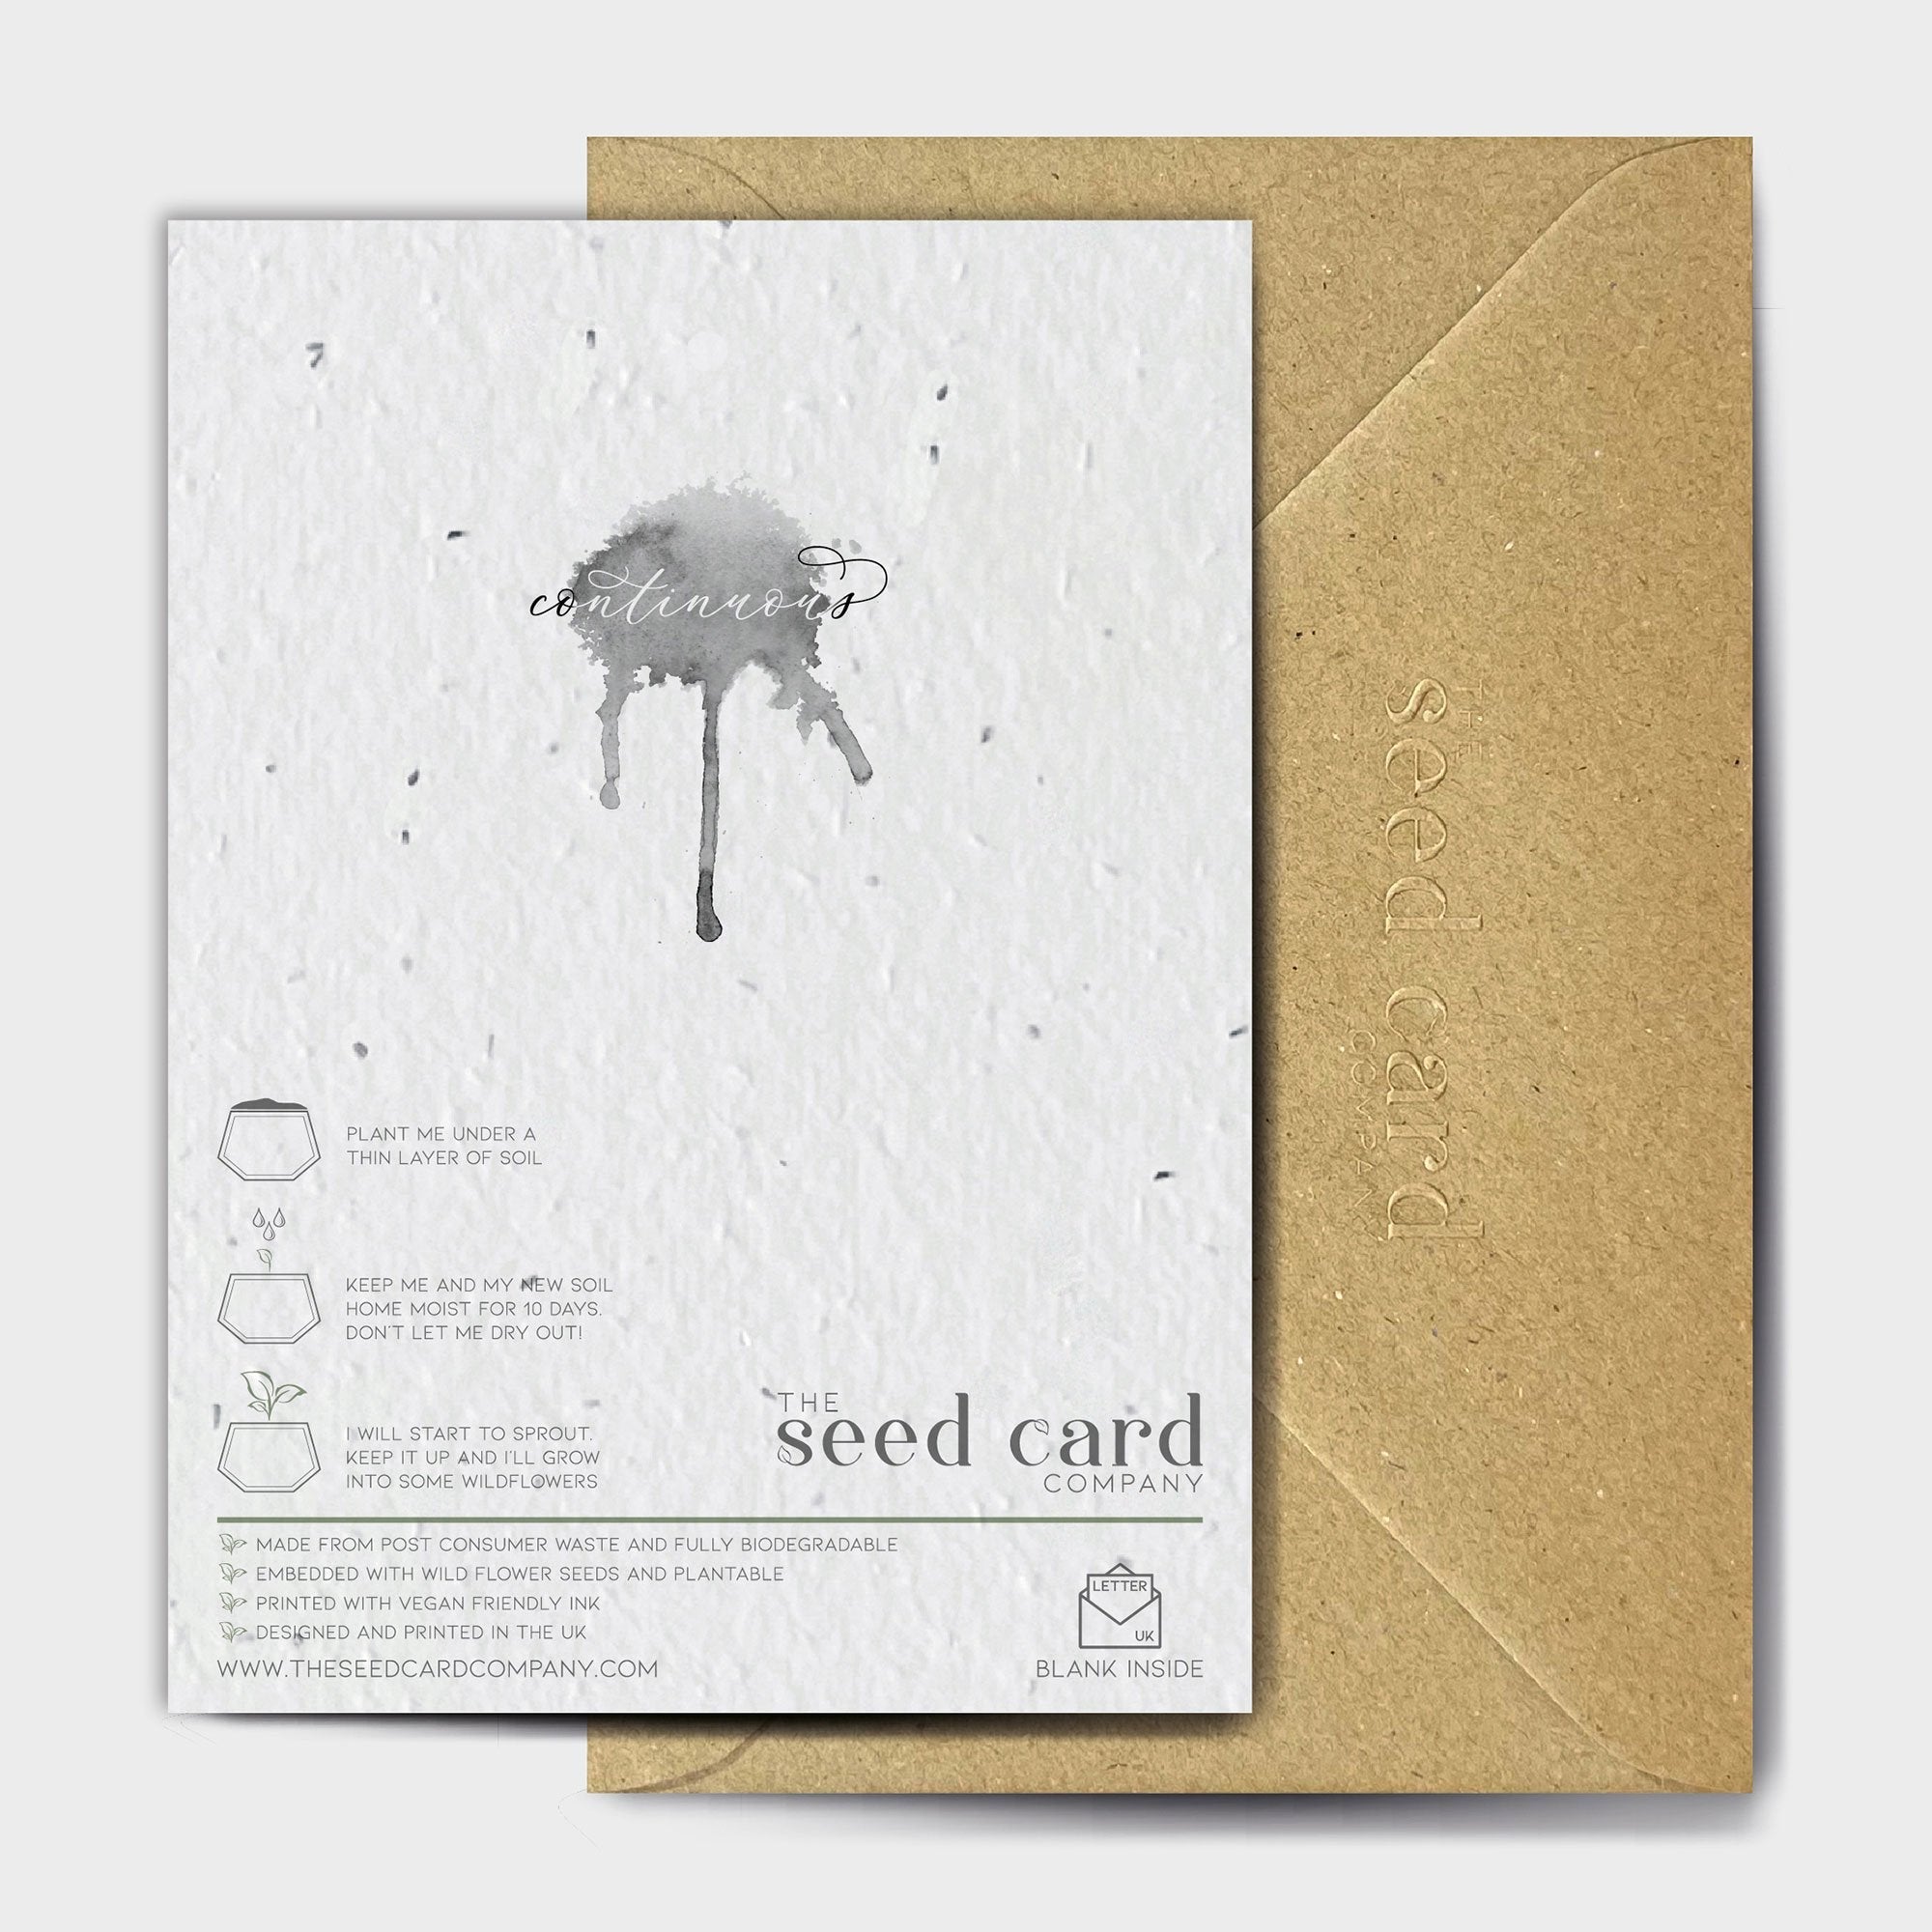 Shop online A Single Piece Of Cake - 100% biodegradable seed-embedded cards Shop -The Seed Card Company